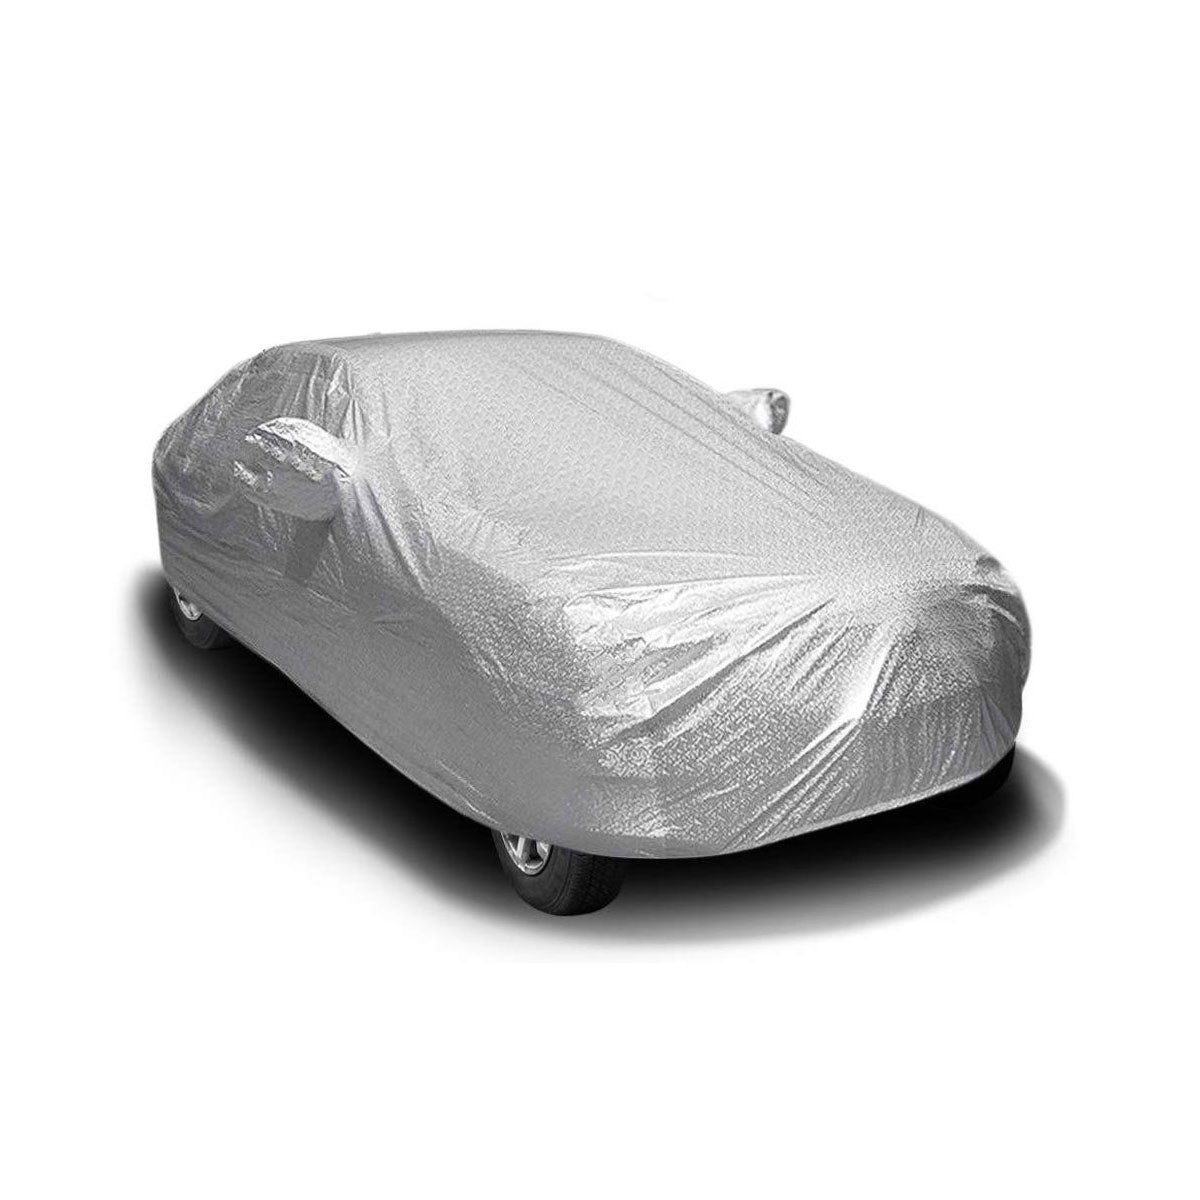 Oshotto Spyro Silver Anti Reflective, dustproof and Water Proof Car Body Cover with Mirror Pockets For Hyundai i10 Nios